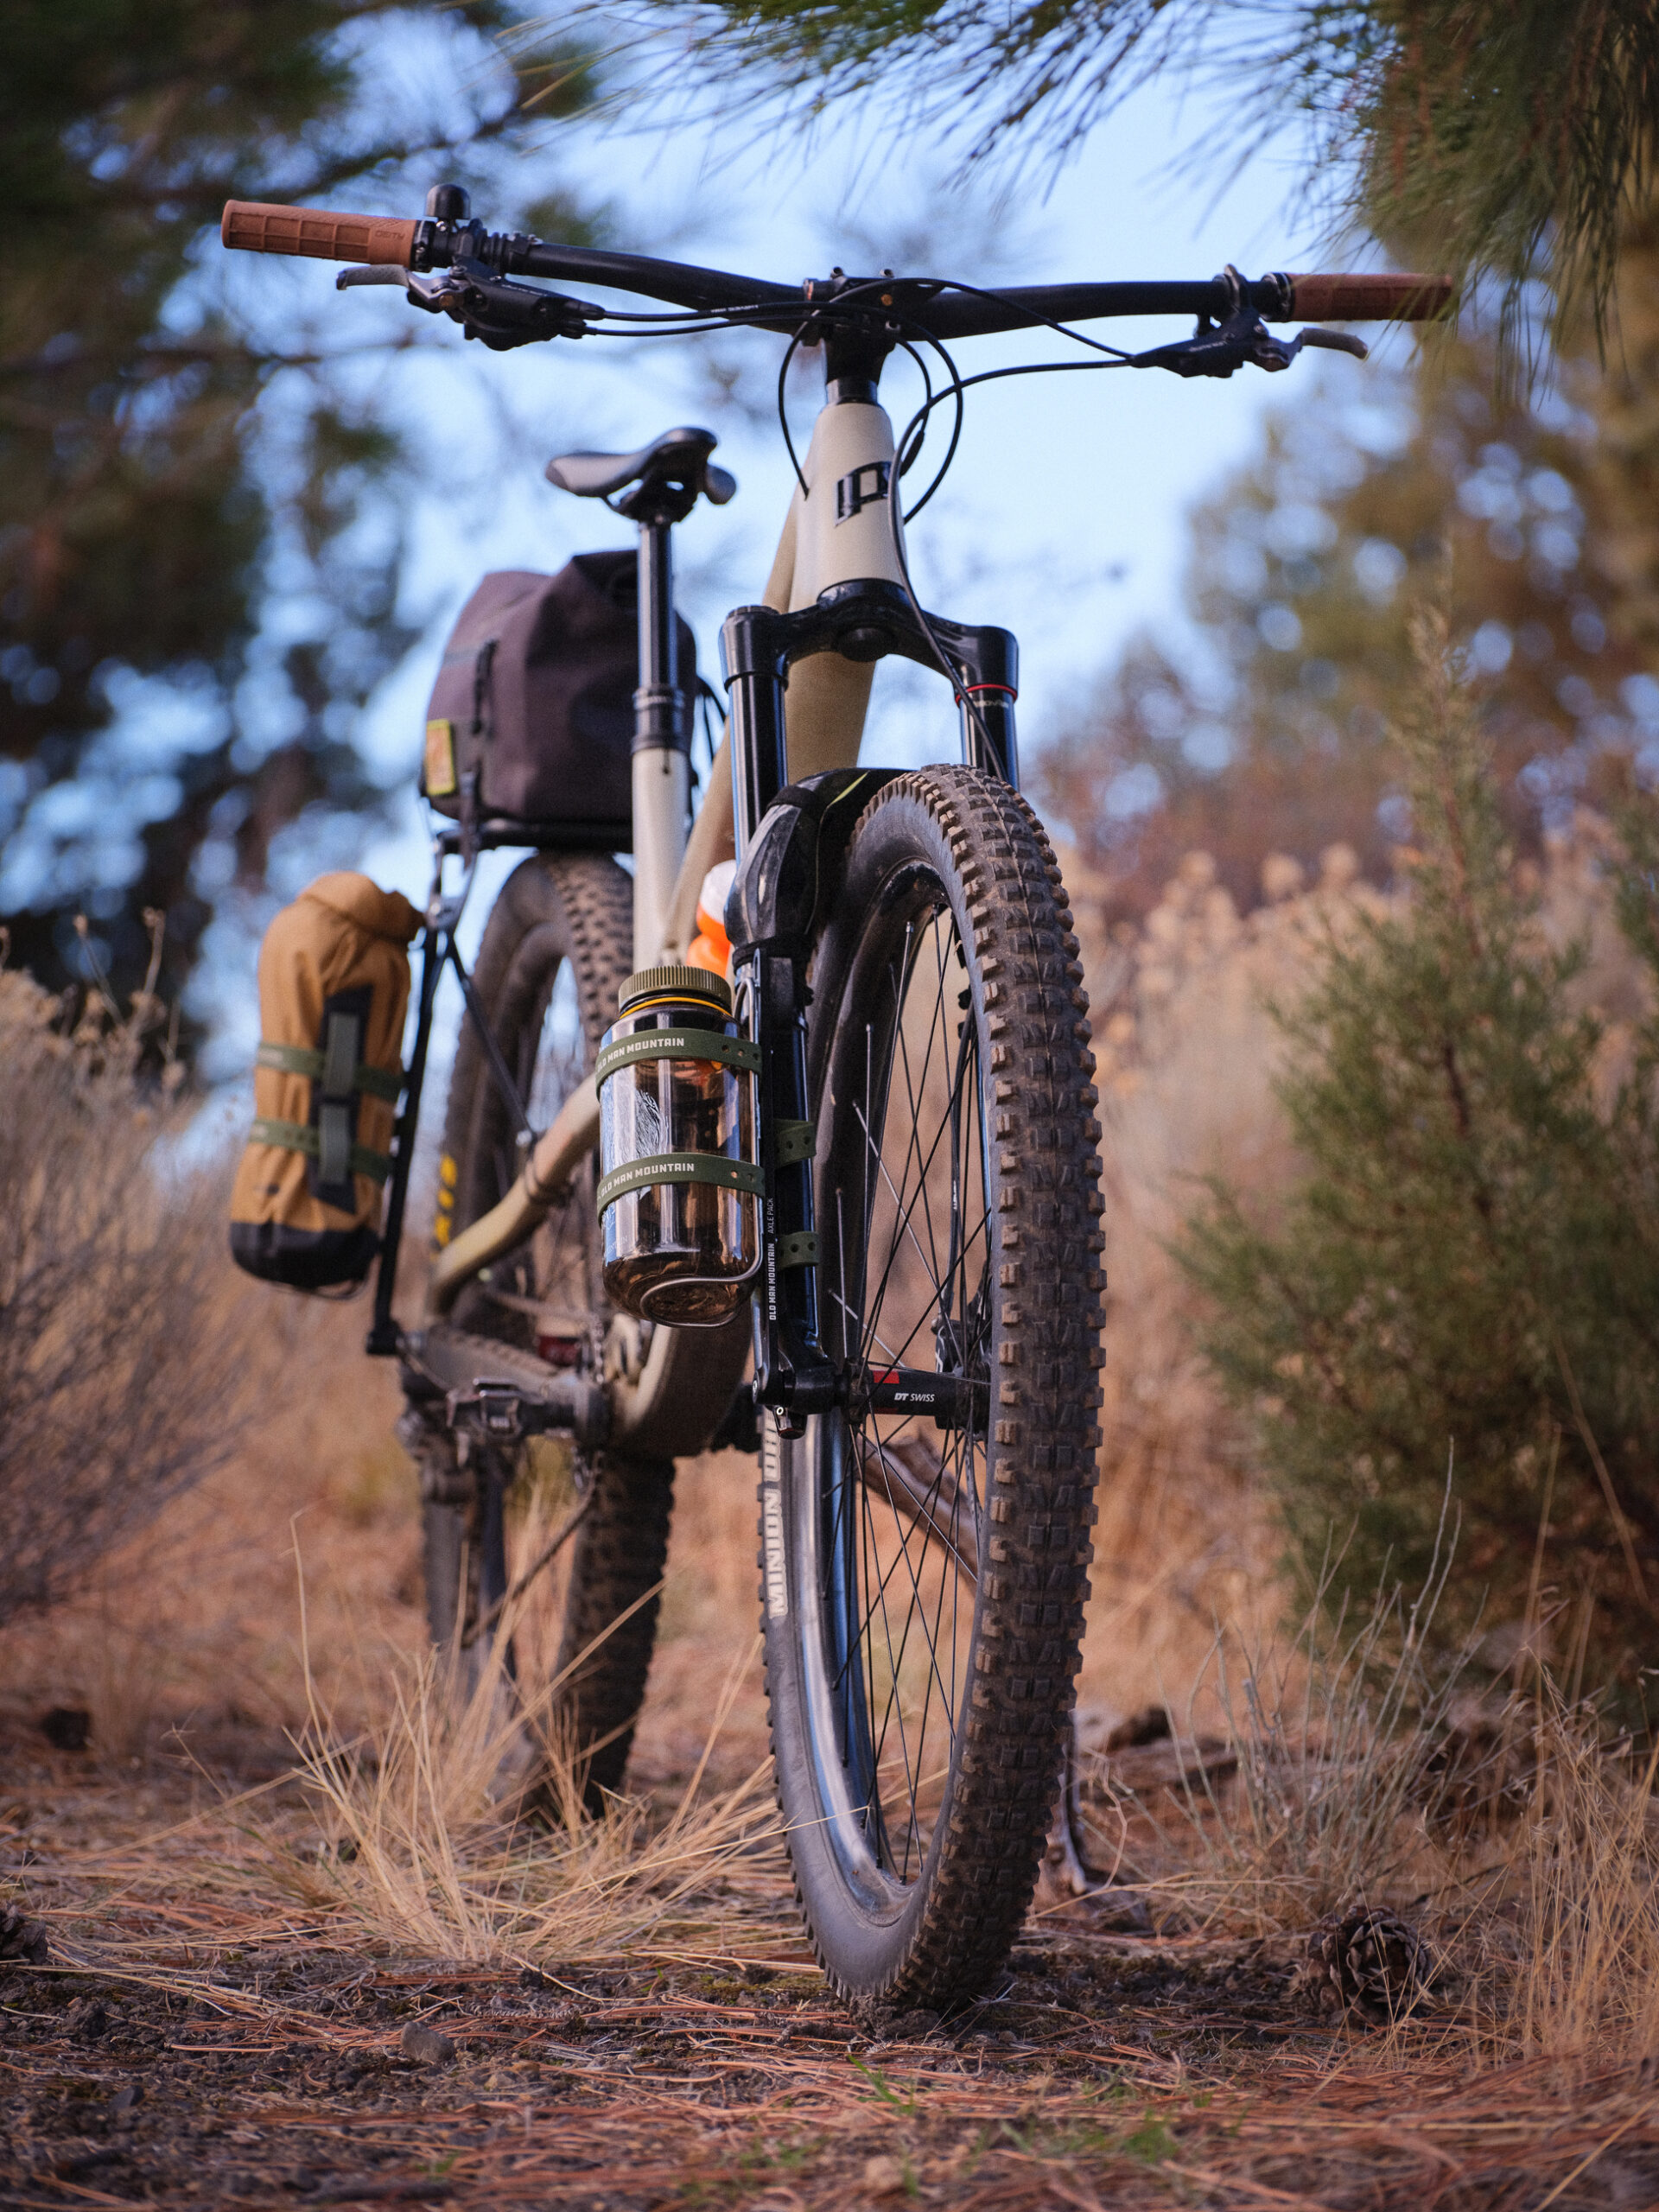 Suspension fork mounted cargo cage adapter, Axle Pack, mounted on a full-suspension mountain bike